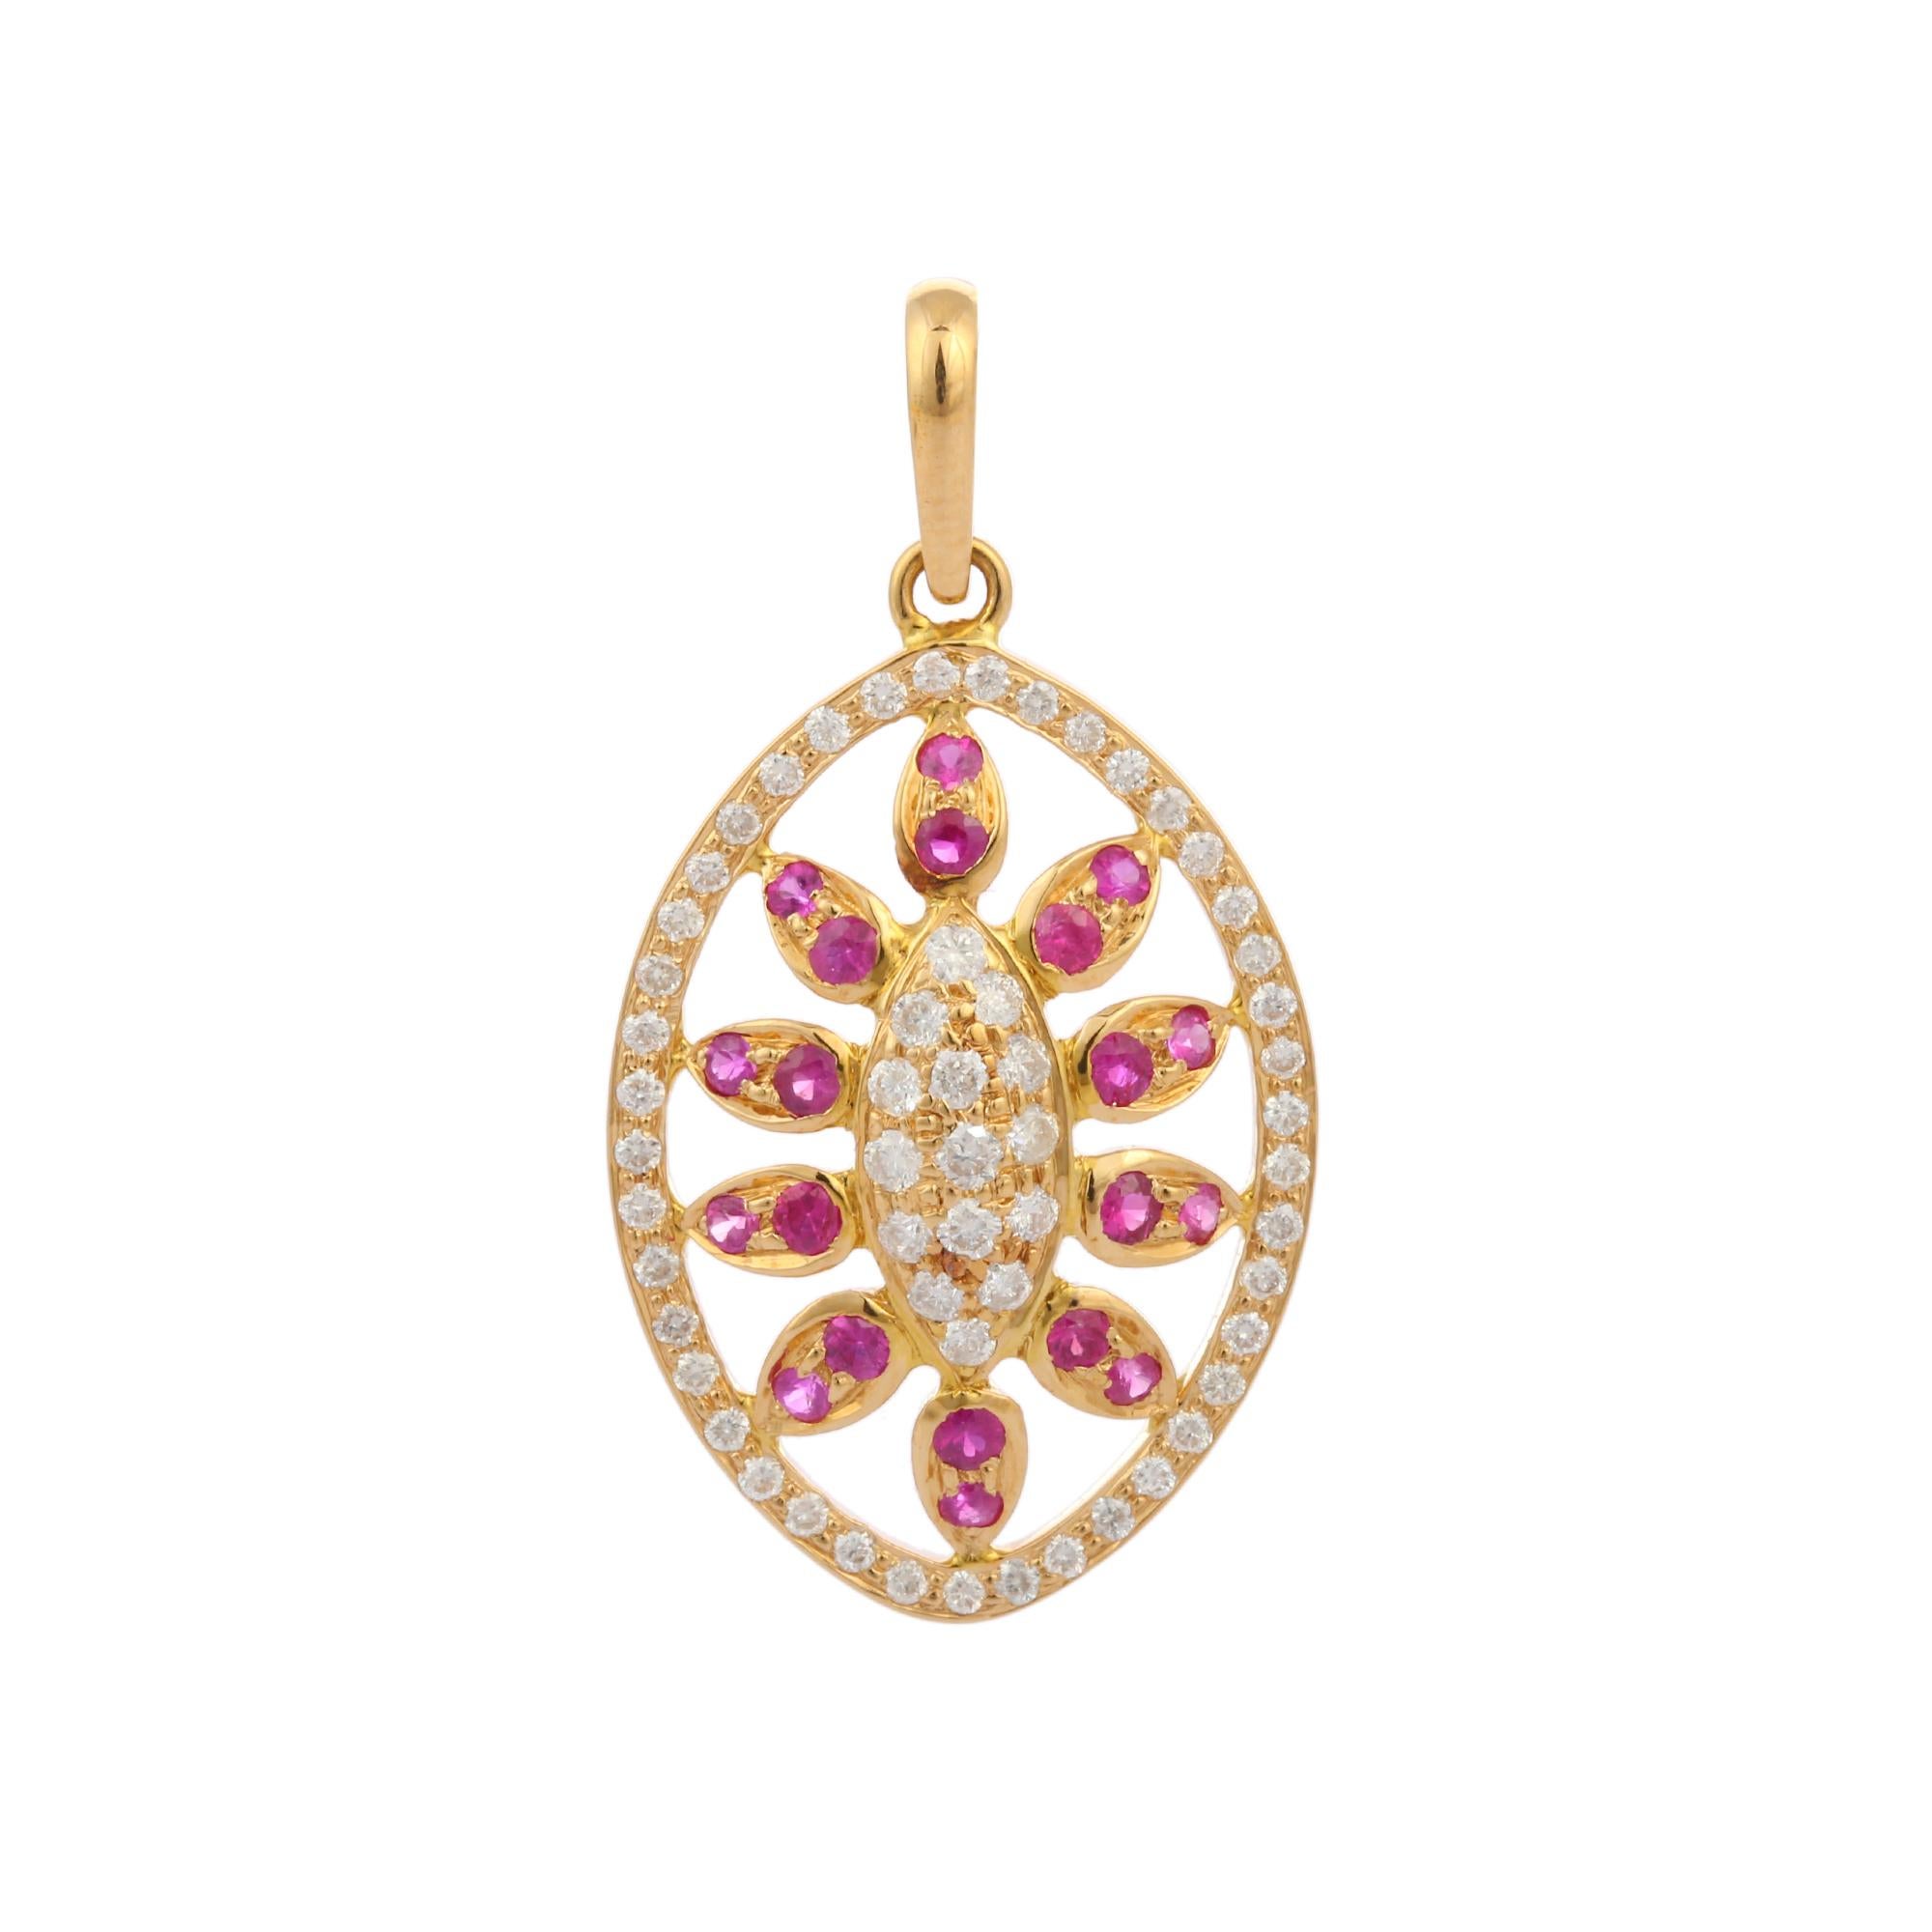 Contemporary natural ruby and diamond pendant in 18K Gold. It has a round cut ruby with diamonds that completes your look with a decent touch. Pendants are used to wear or gifted to represent love and promises. It's an attractive jewelry piece that